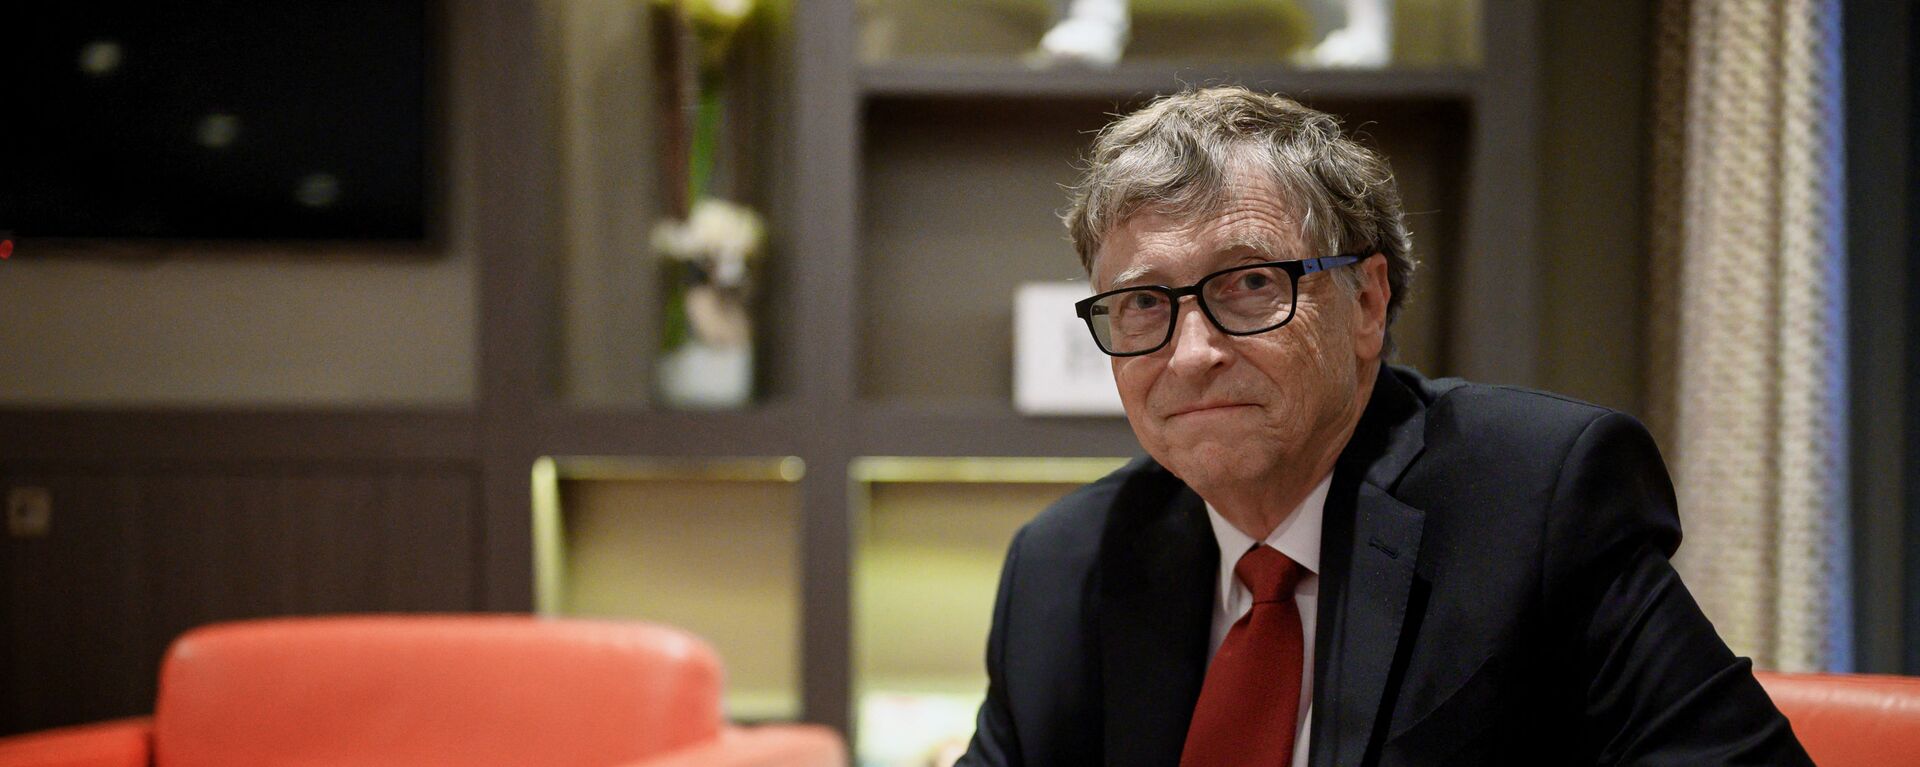 US Microsoft founder, Co-Chairman of the Bill & Melinda Gates Foundation, Bill Gates, poses for a picture on October 9, 2019, in Lyon, central eastern France, during the funding conference of Global Fund to Fight AIDS, Tuberculosis and Malaria.  - Sputnik International, 1920, 02.06.2021